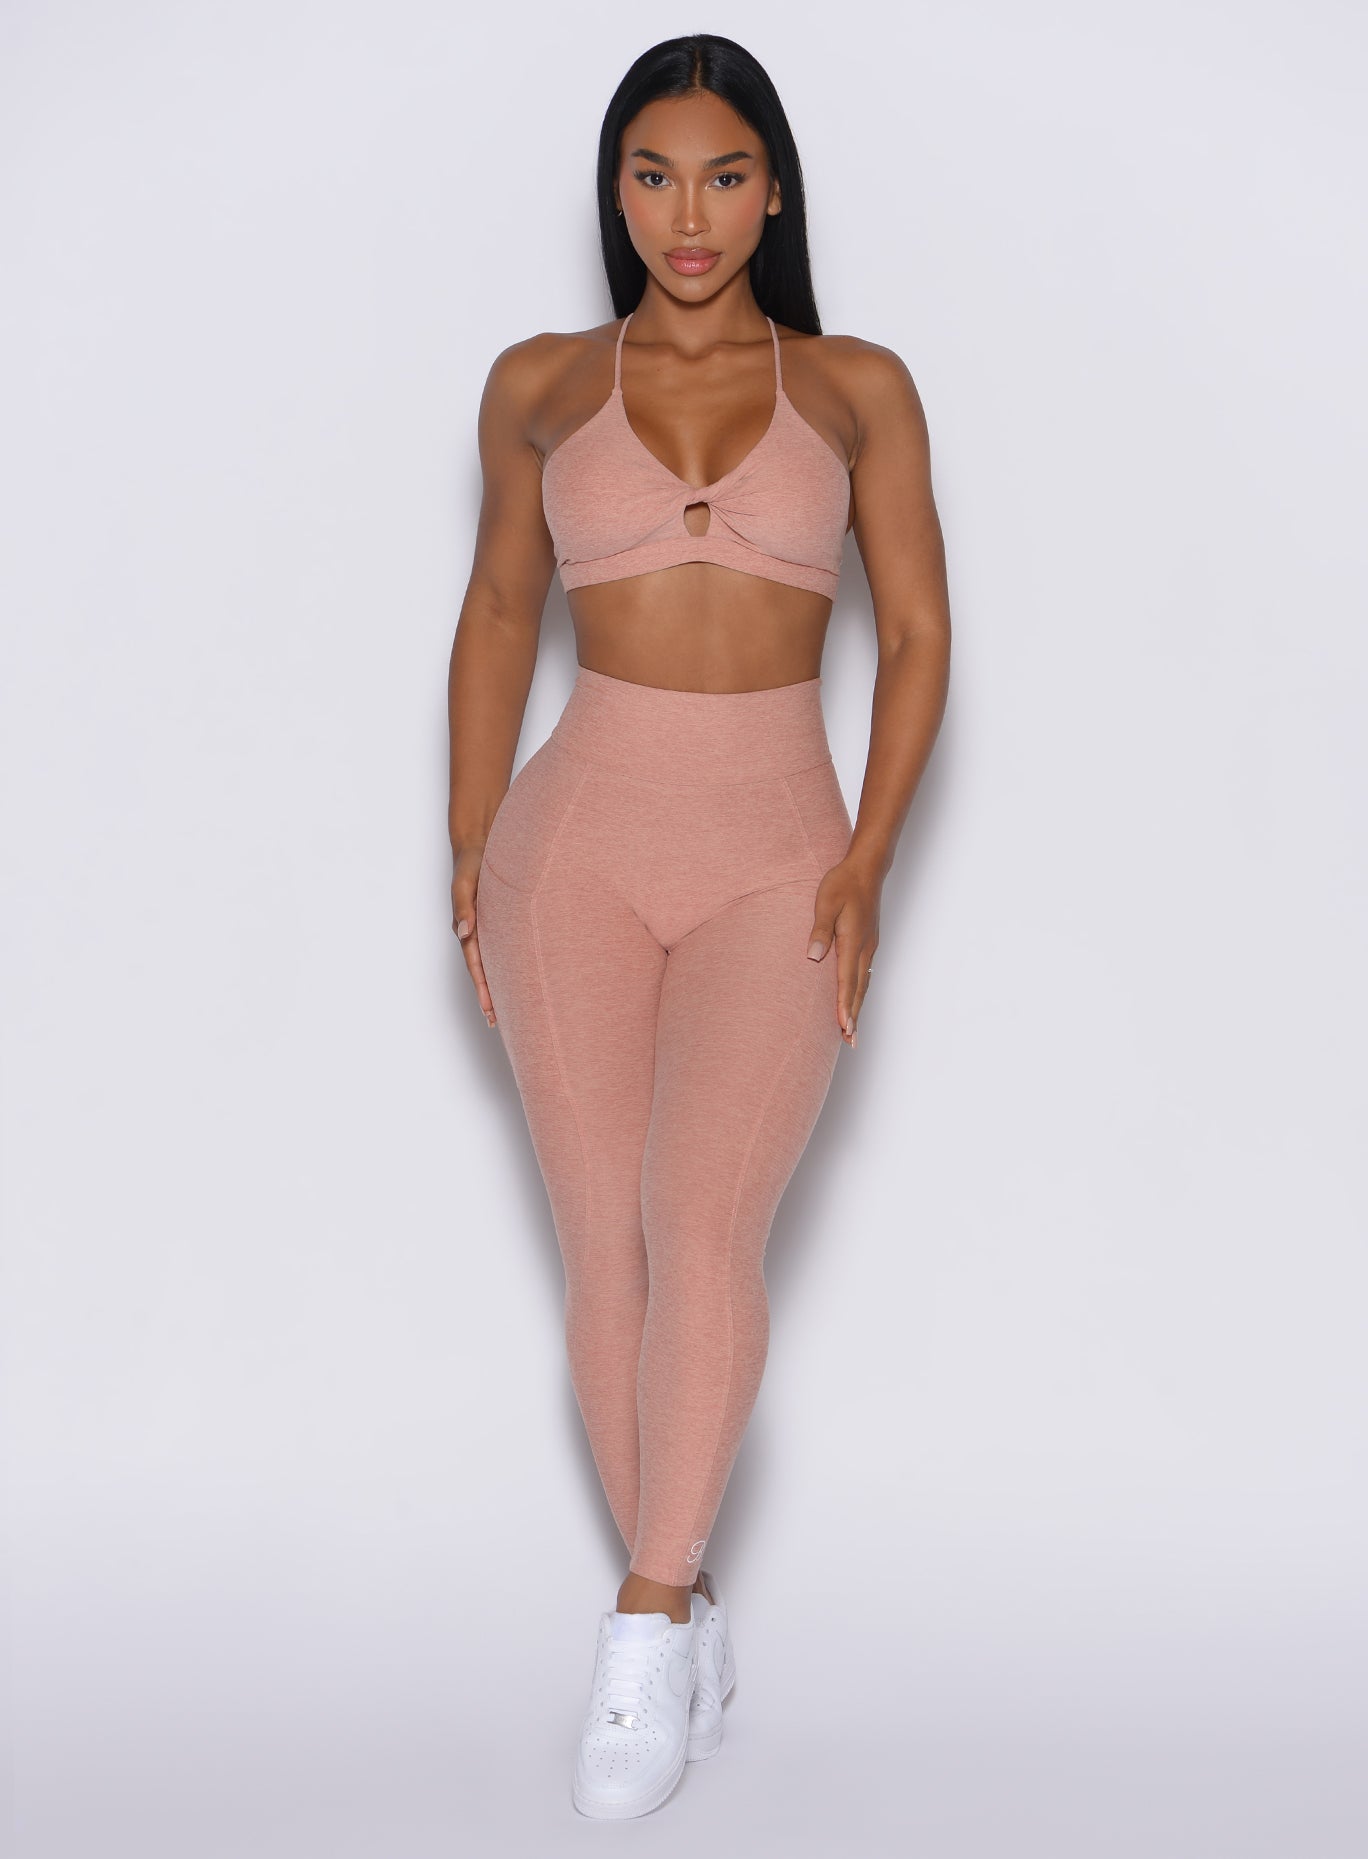 A front-profile view of a model wearing our Curves leggings in Nude Sand color, paired with the matching sports bra.